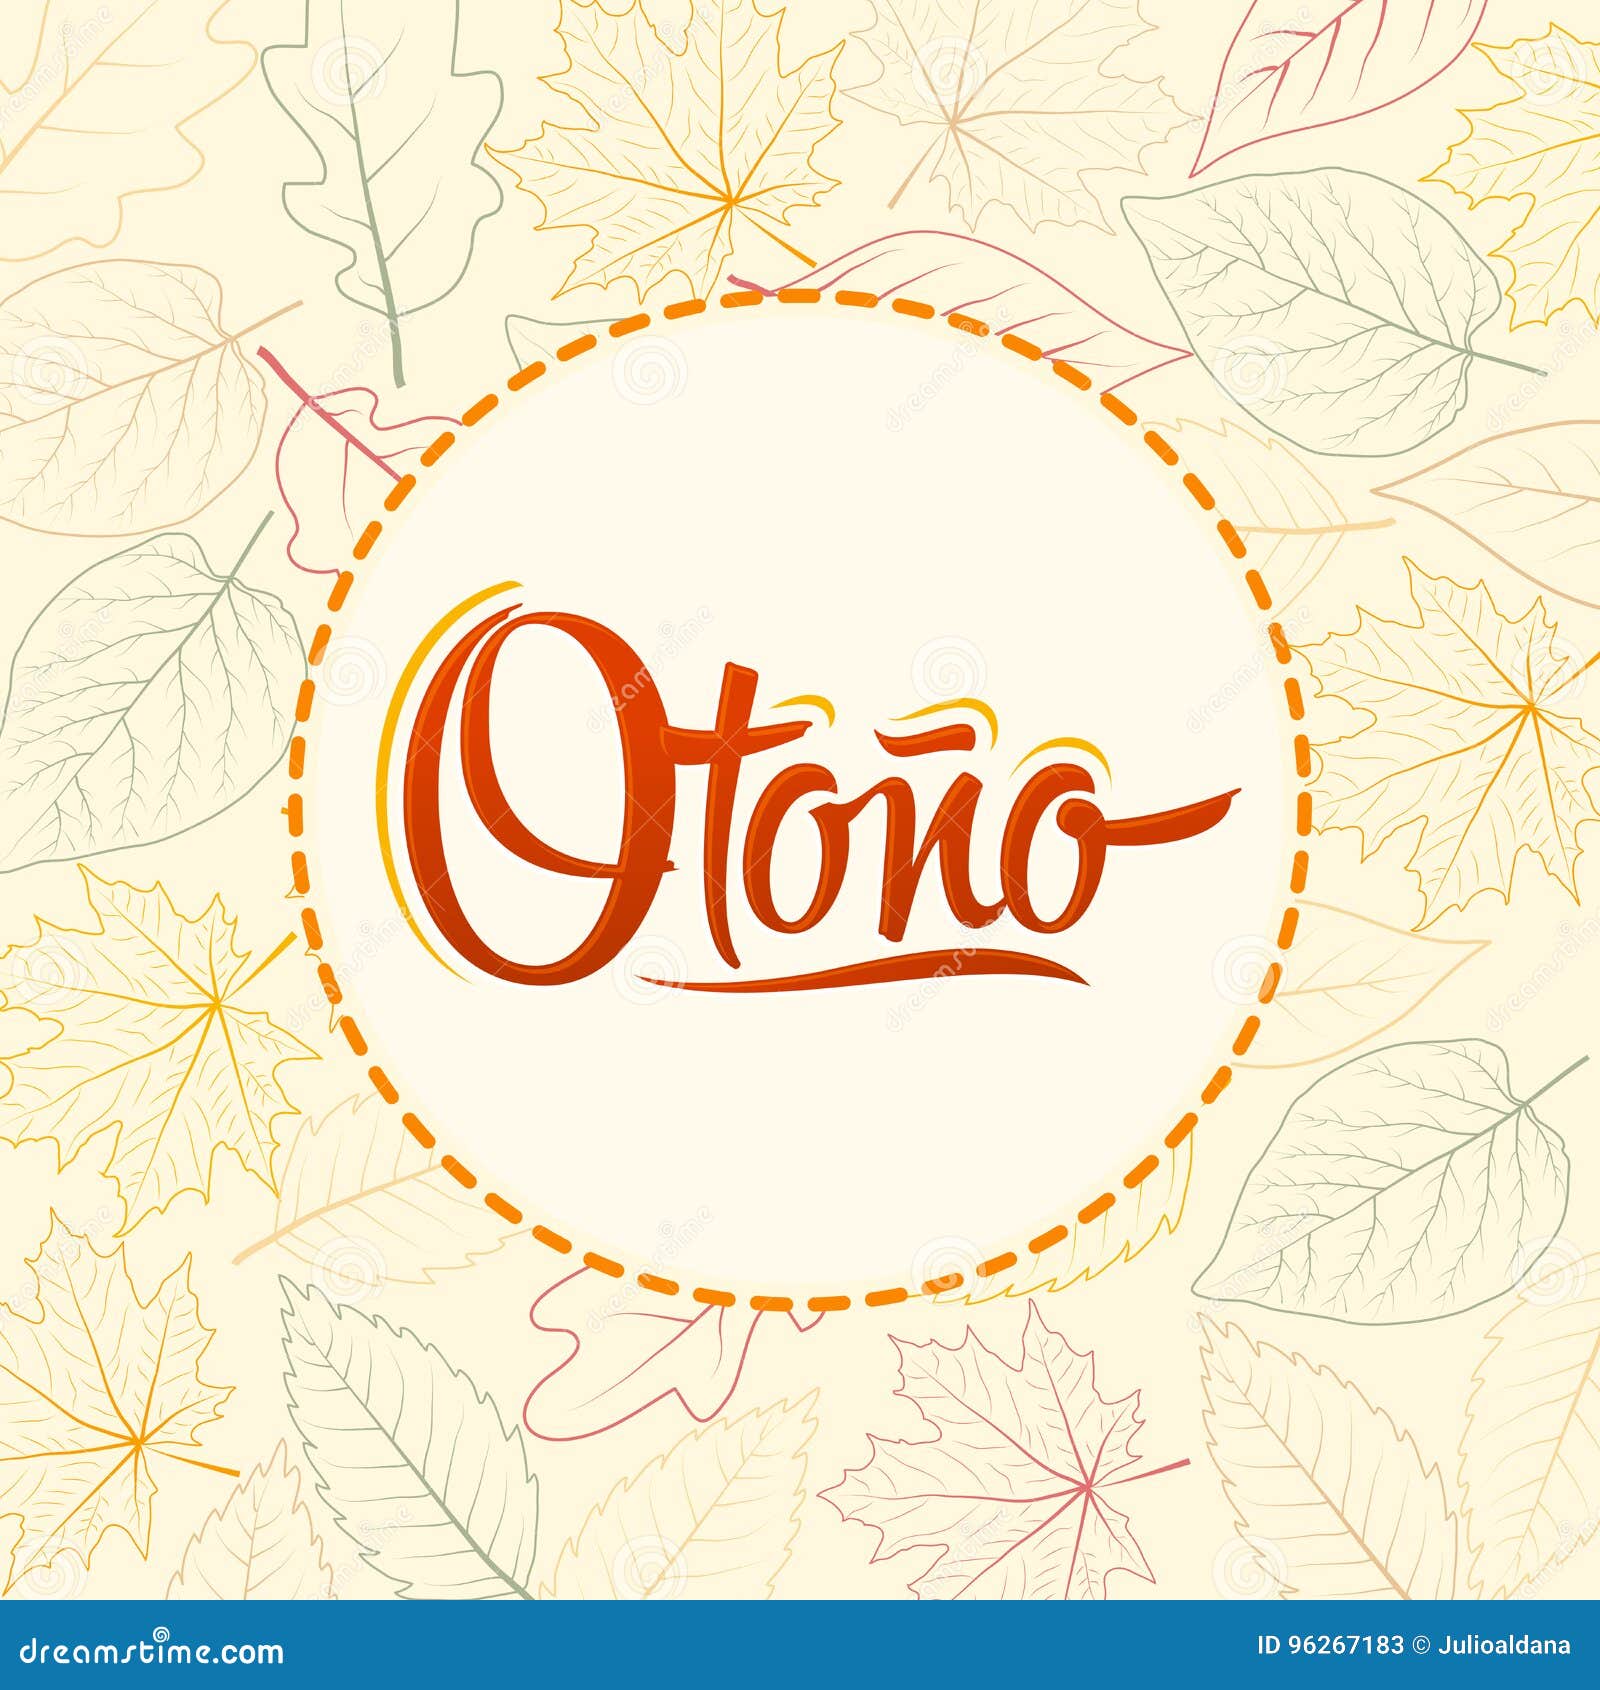 otono, autumn spanish text,  lettering  with leaf background